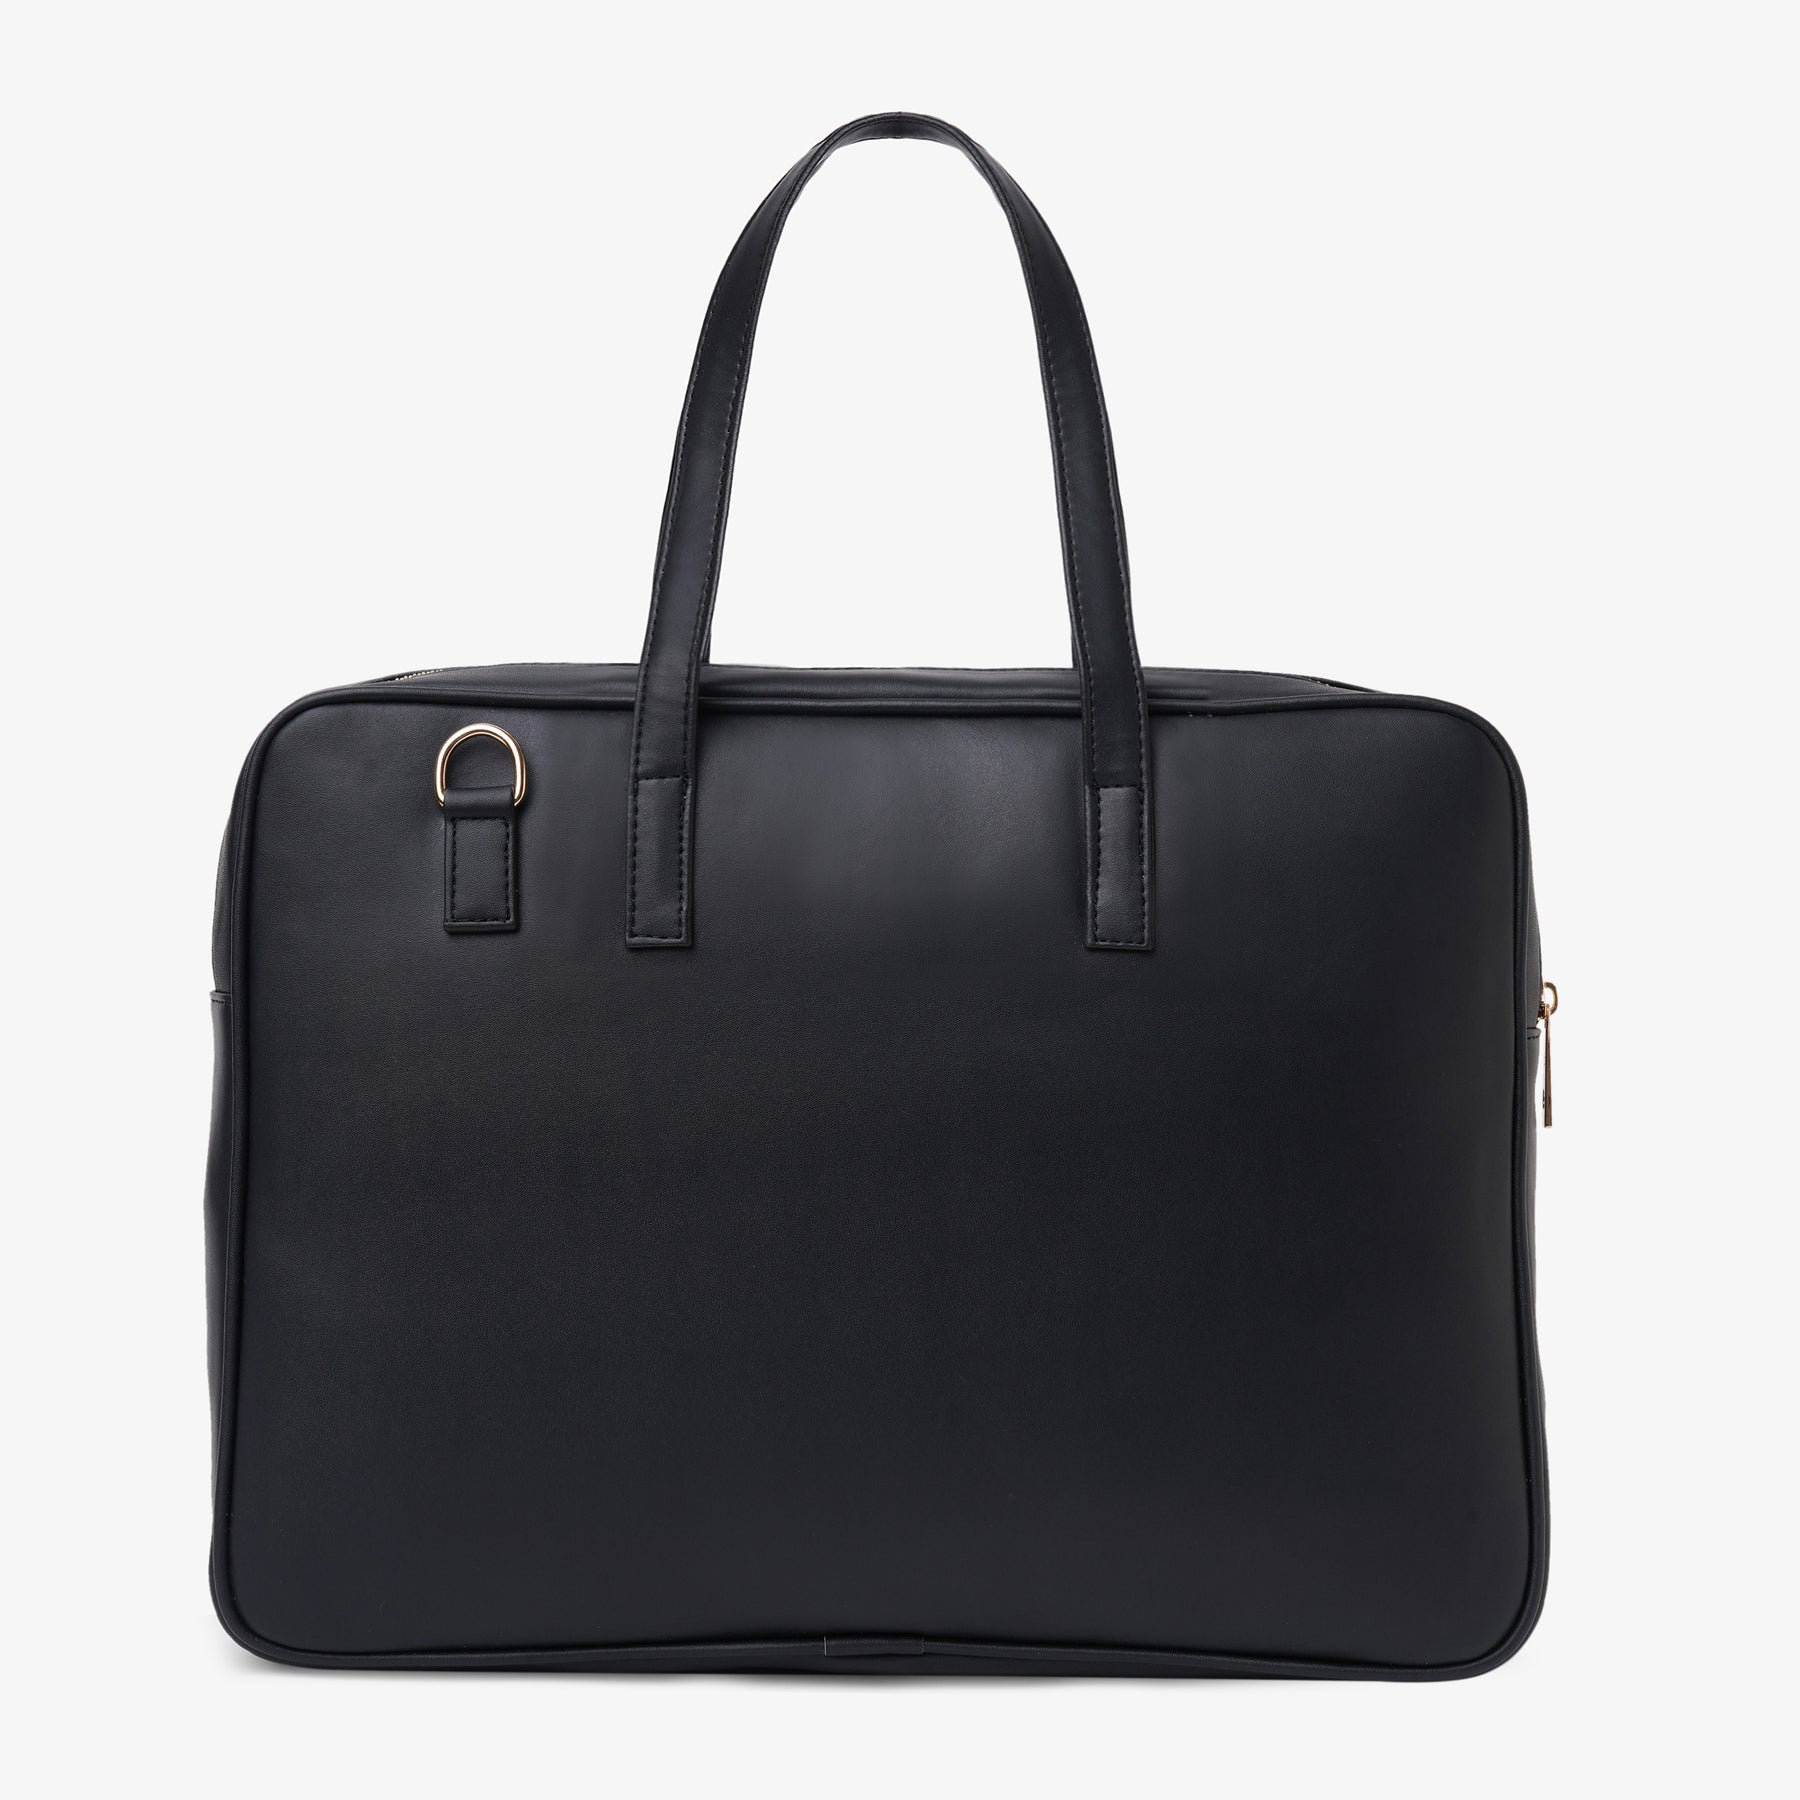 Office Laptop Bags for Women and Ladies Crafted in Leather